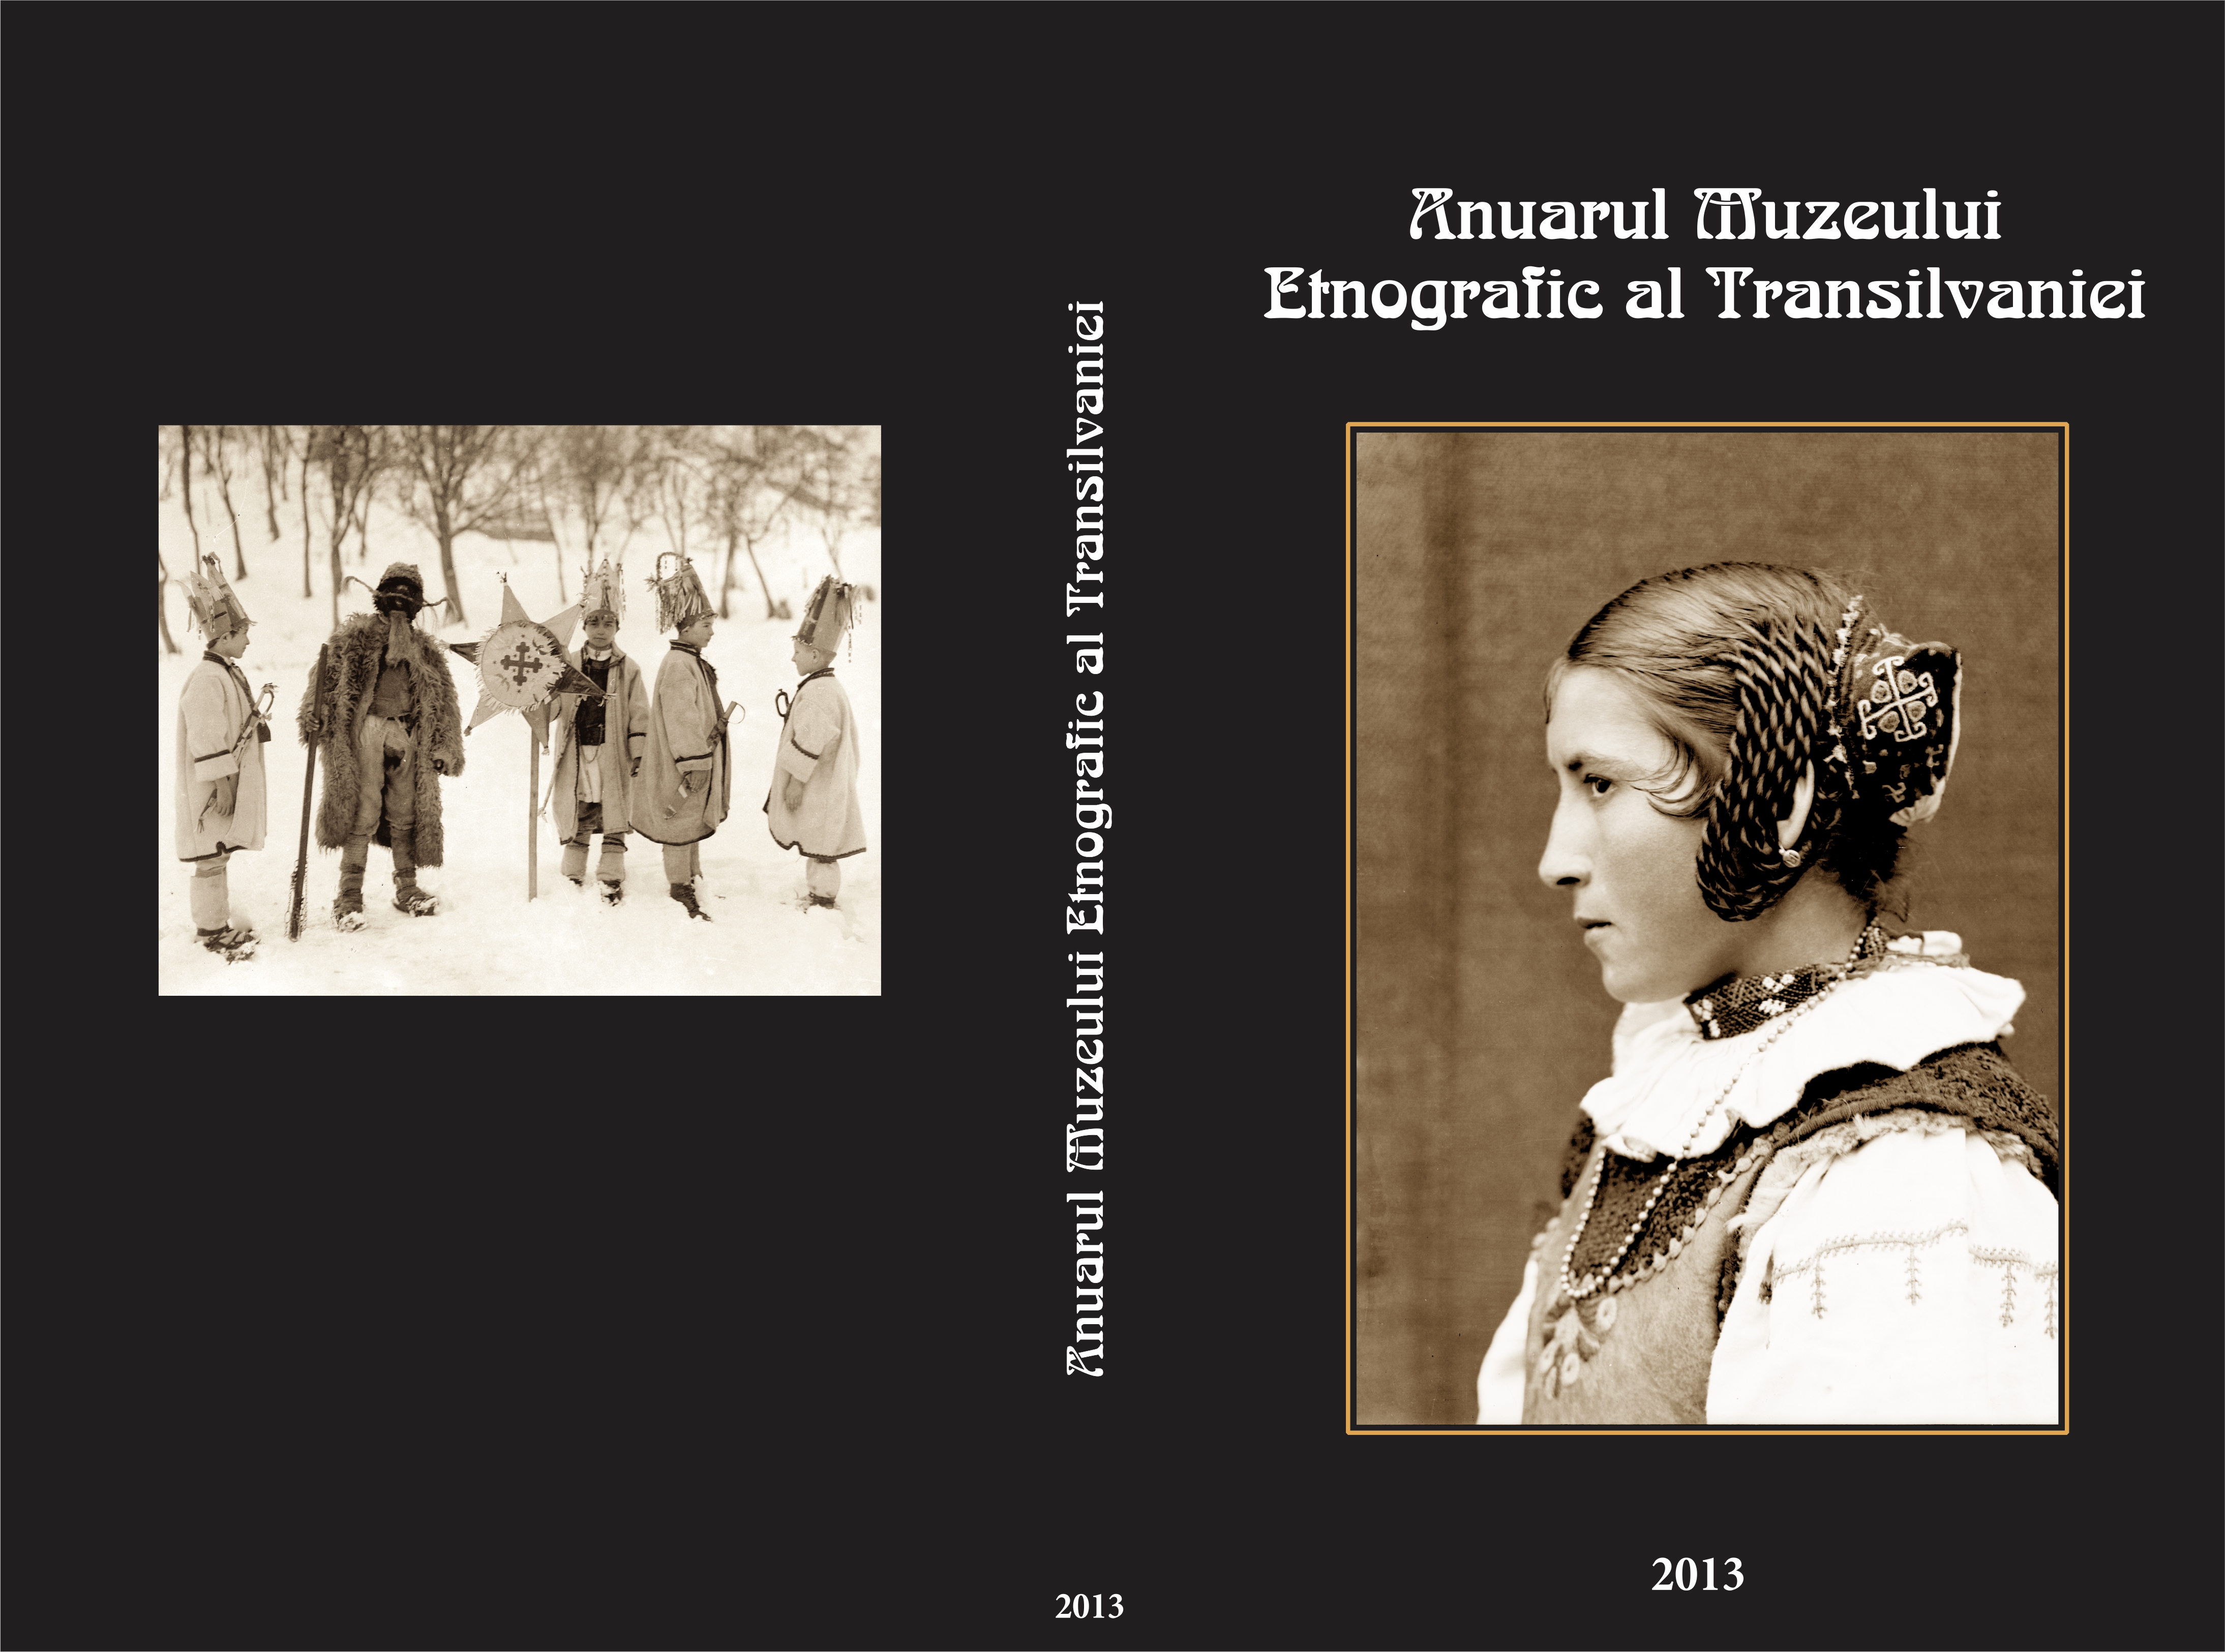 The History of Revival of our National Dances: Romana, Romanulu and
Batuta... by [Stefan Emilian] and Some Other Issues of Ethnocoreology Cover Image